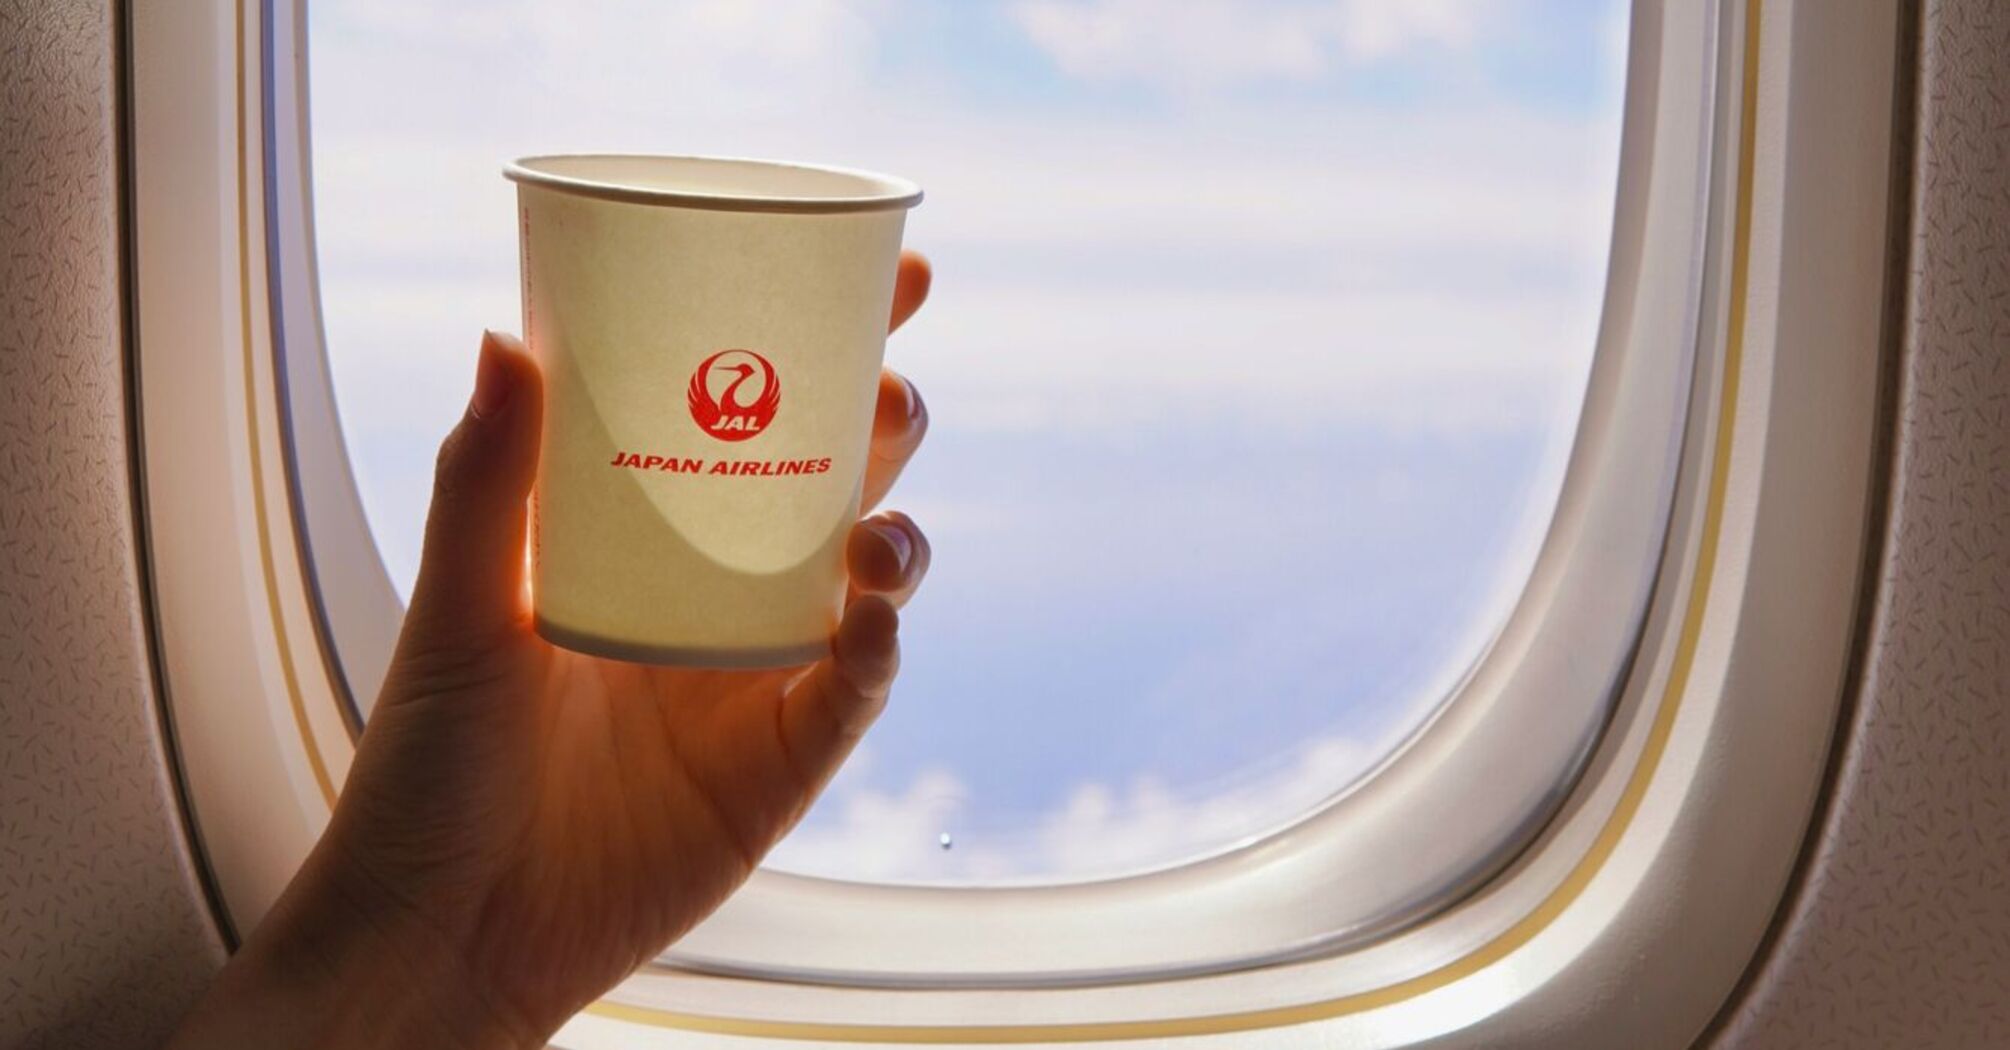 A hand holding a Japan Airlines branded paper cup against the background of an airplane window showing blue skies and clouds